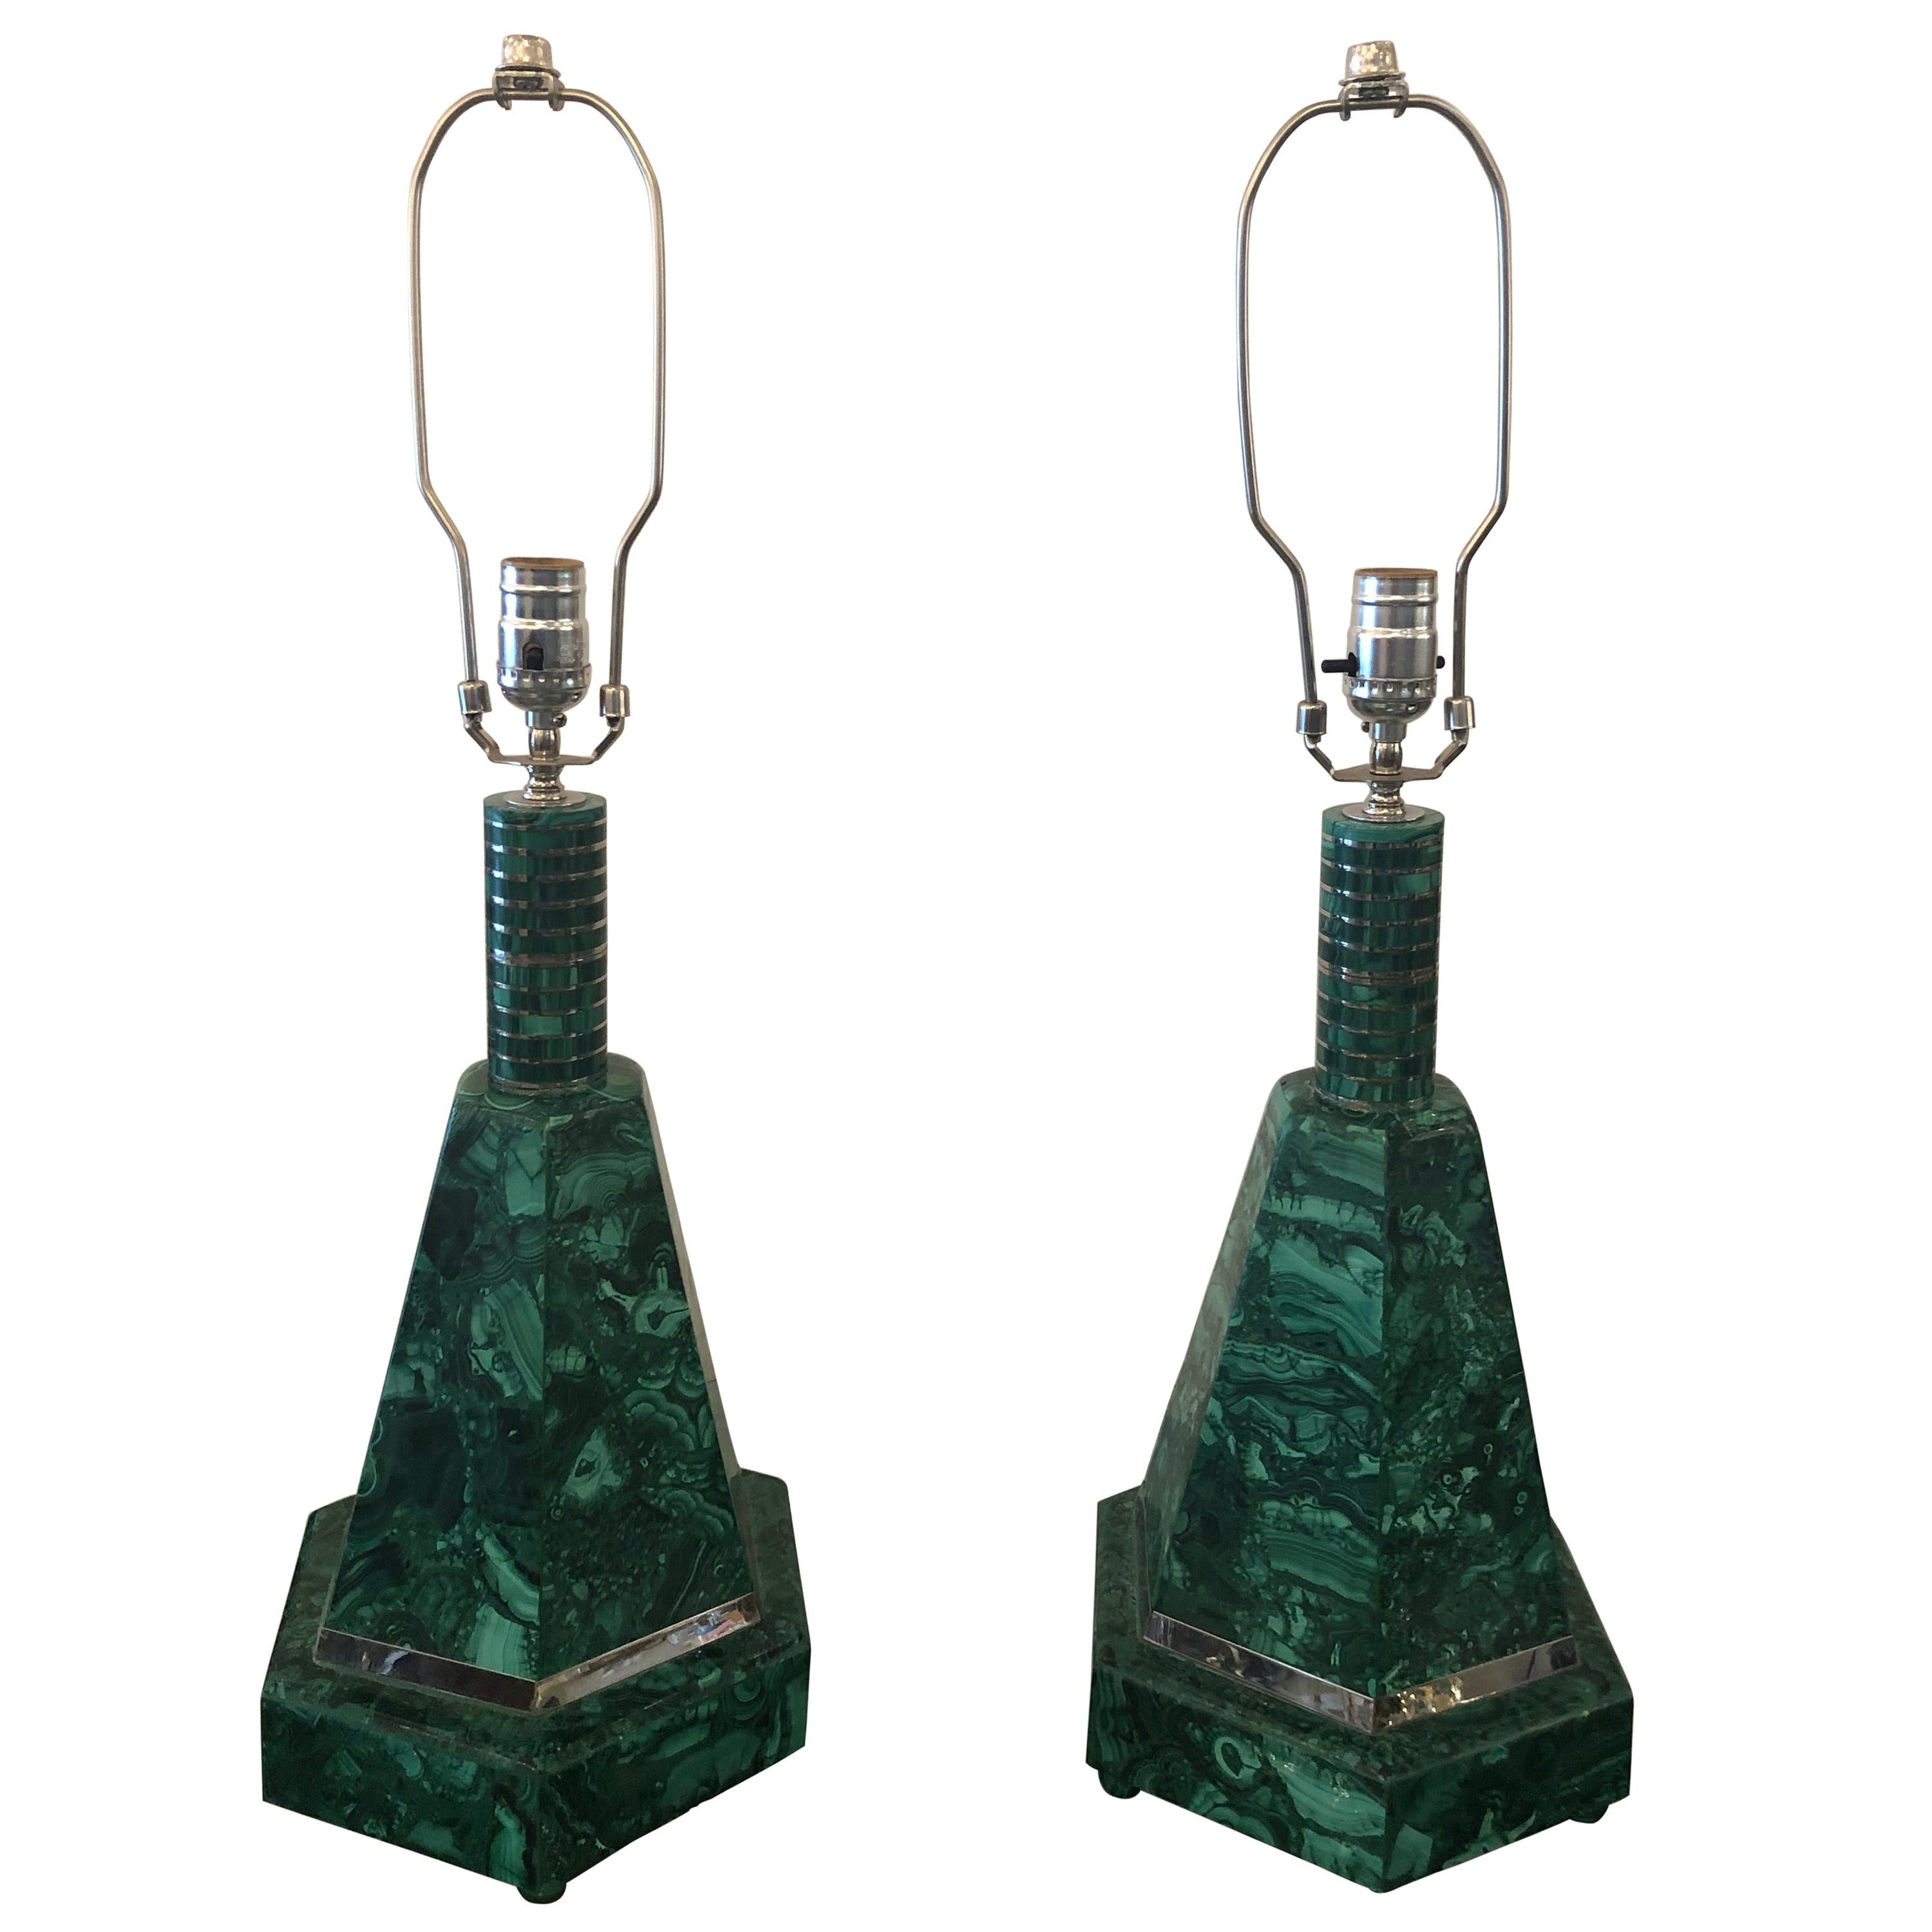 Pair of Malachite Lighthouse Lamps